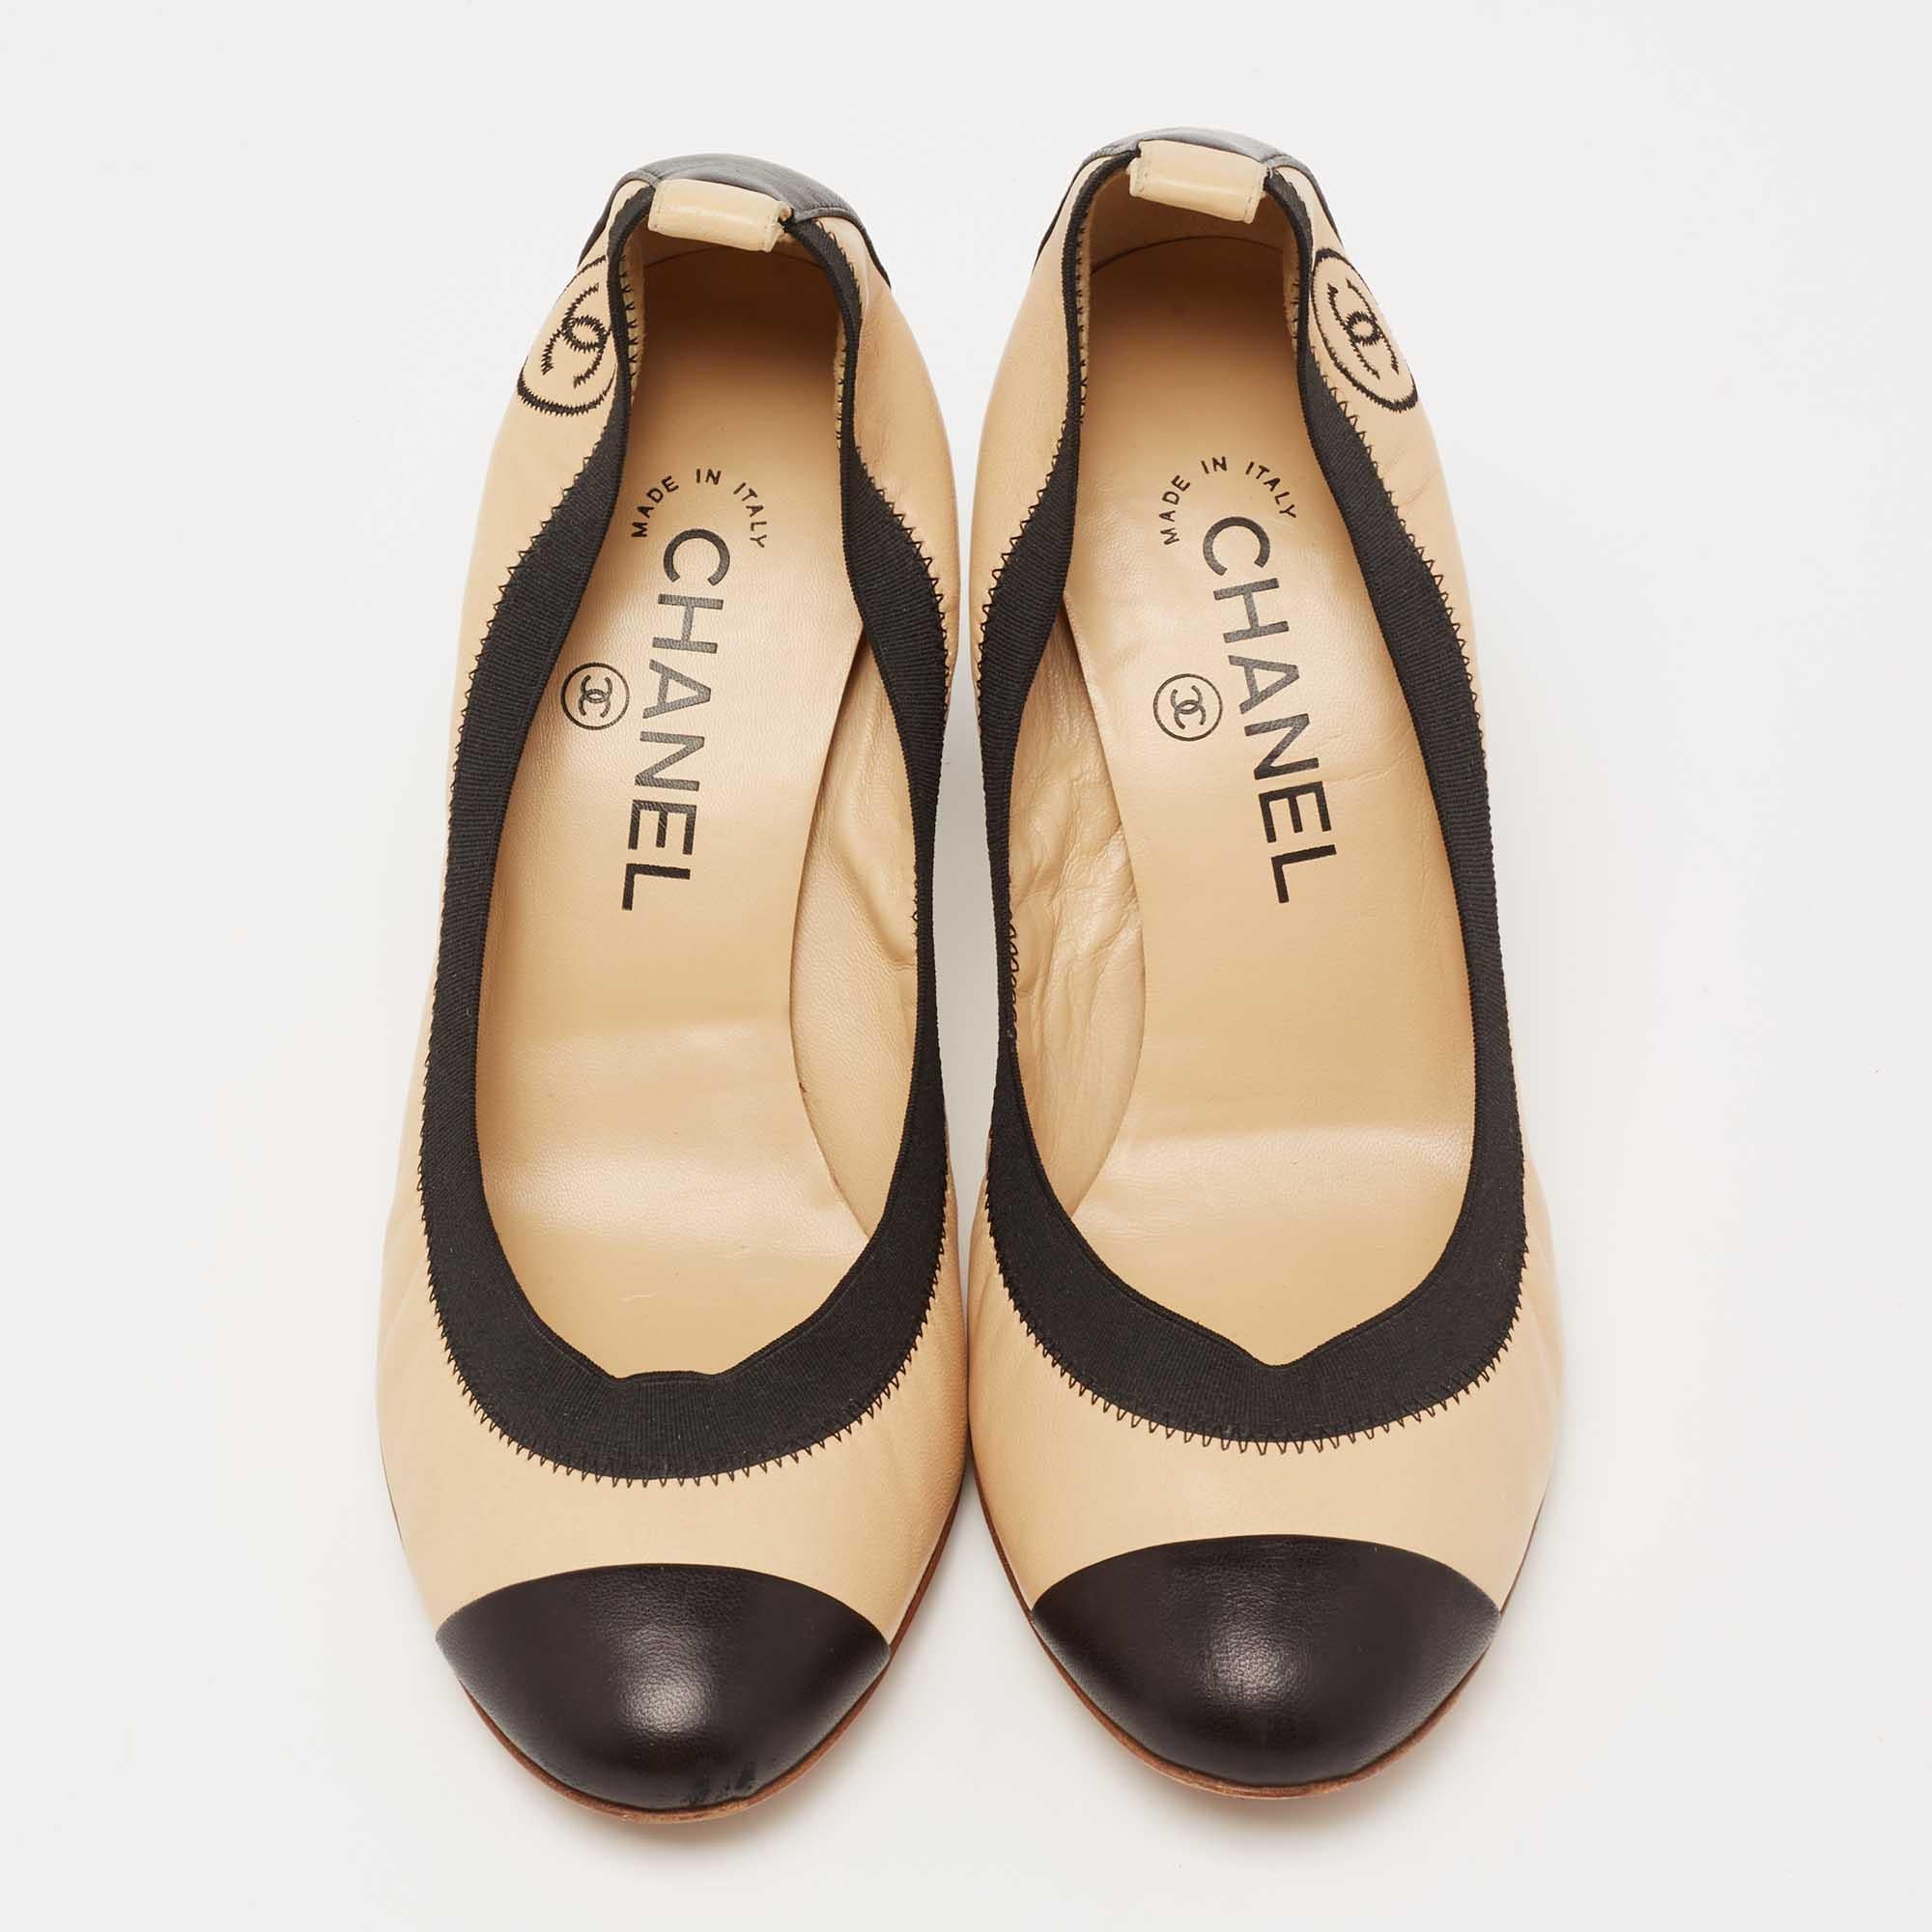 Take every step with elegance and style in these pumps from the House of Chanel. They are crafted meticulously using beige-black leather and showcase cap toes, a scrunch style, and block heels. A gold-toned CC accent is perched on the upper. These